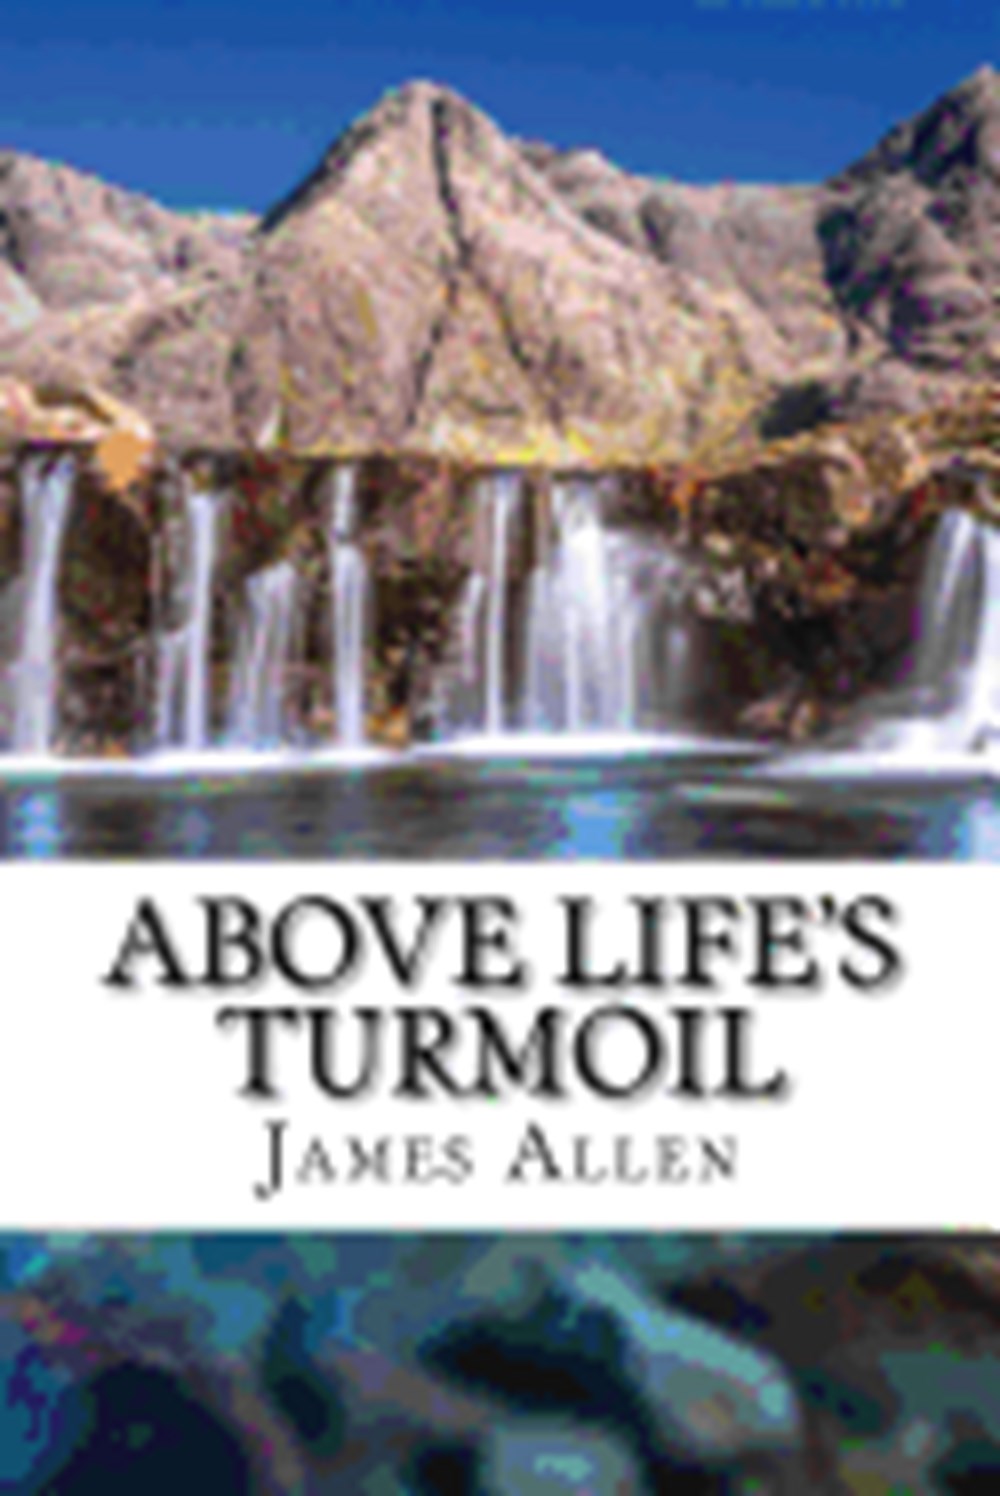 Above Life's Turmoil (annotated with Biography about James Allen)